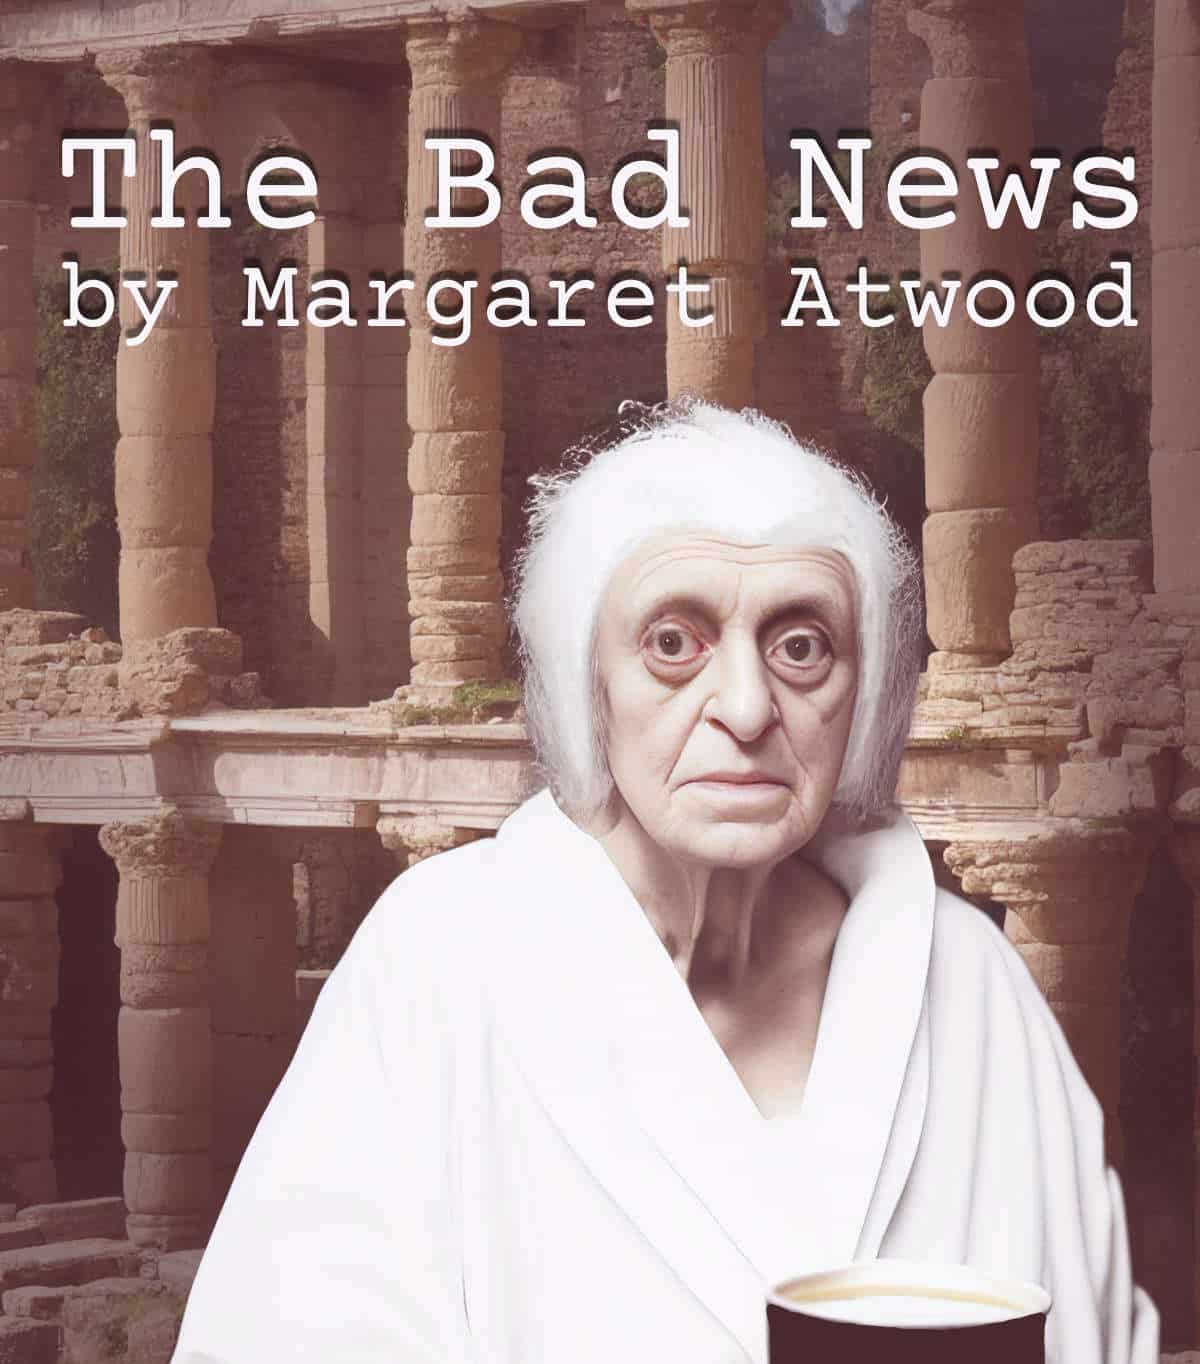 The Bad News by Margaret Atwood Short Story Analysis